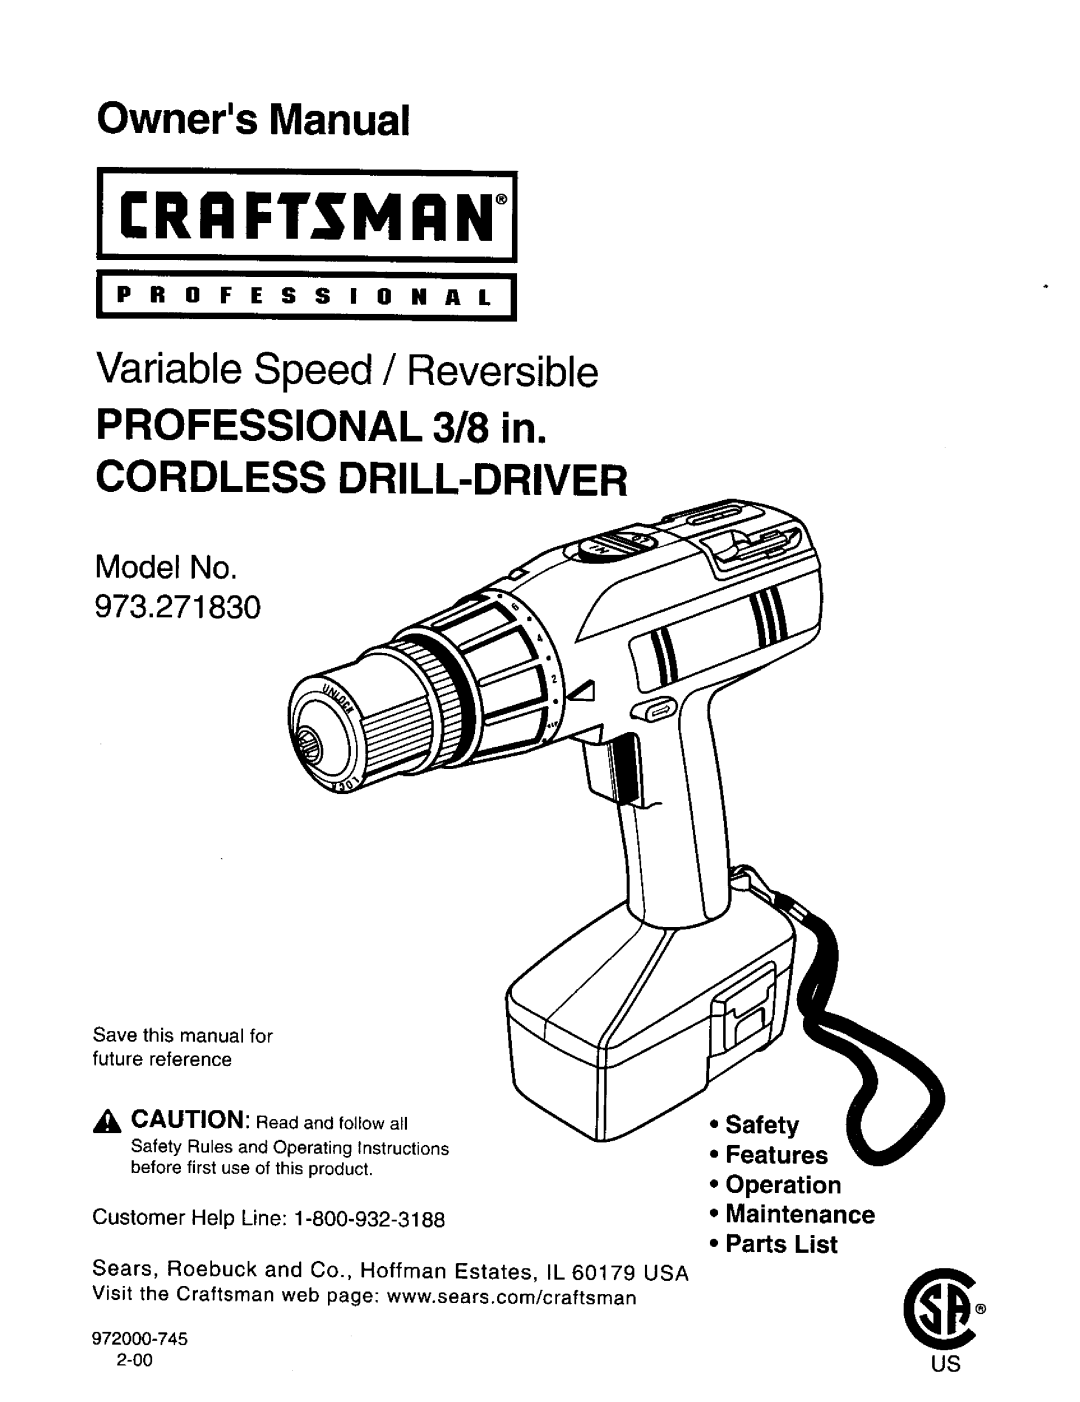 Craftsman 973.271830 owner manual OwnersManual, Variable Speed / Reversible, PROFESSIONAL 3/8 in, Cordless Drill-Driver 